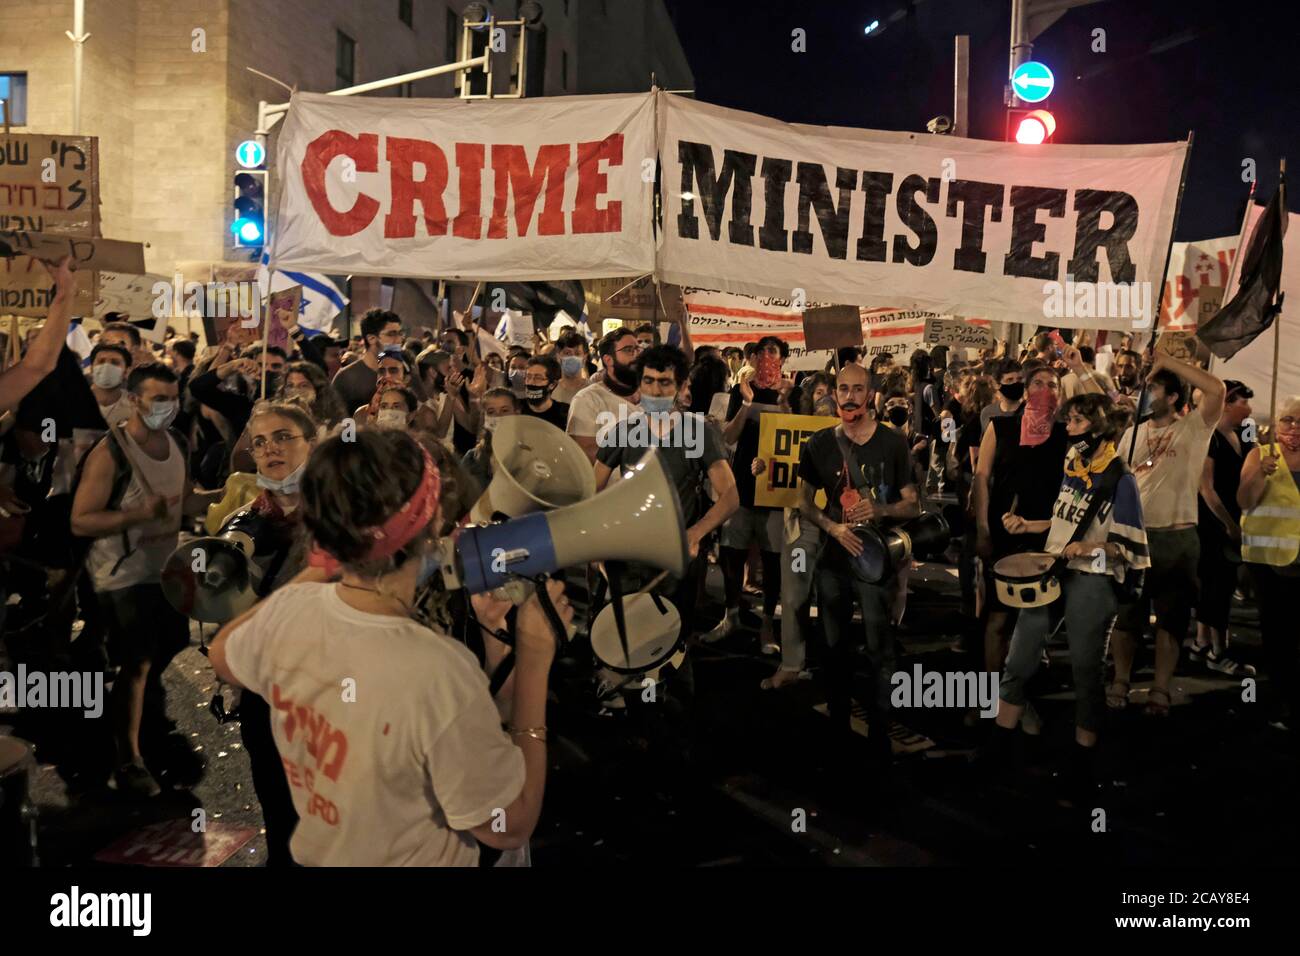 Protesters hold up a large banner which reads 'Crime Minister' and shout slogans during a demonstration attended by over 15,000 people gathered outside the Prime Minister's official residence on August 08, 2020 in Jerusalem, Israel. Israelis have taken to the streets in almost daily demonstrations calling for Netanyahu's resignation over his corruption charges, accused mismanagement of the coronavirus crisis and his assault on democracy. Stock Photo